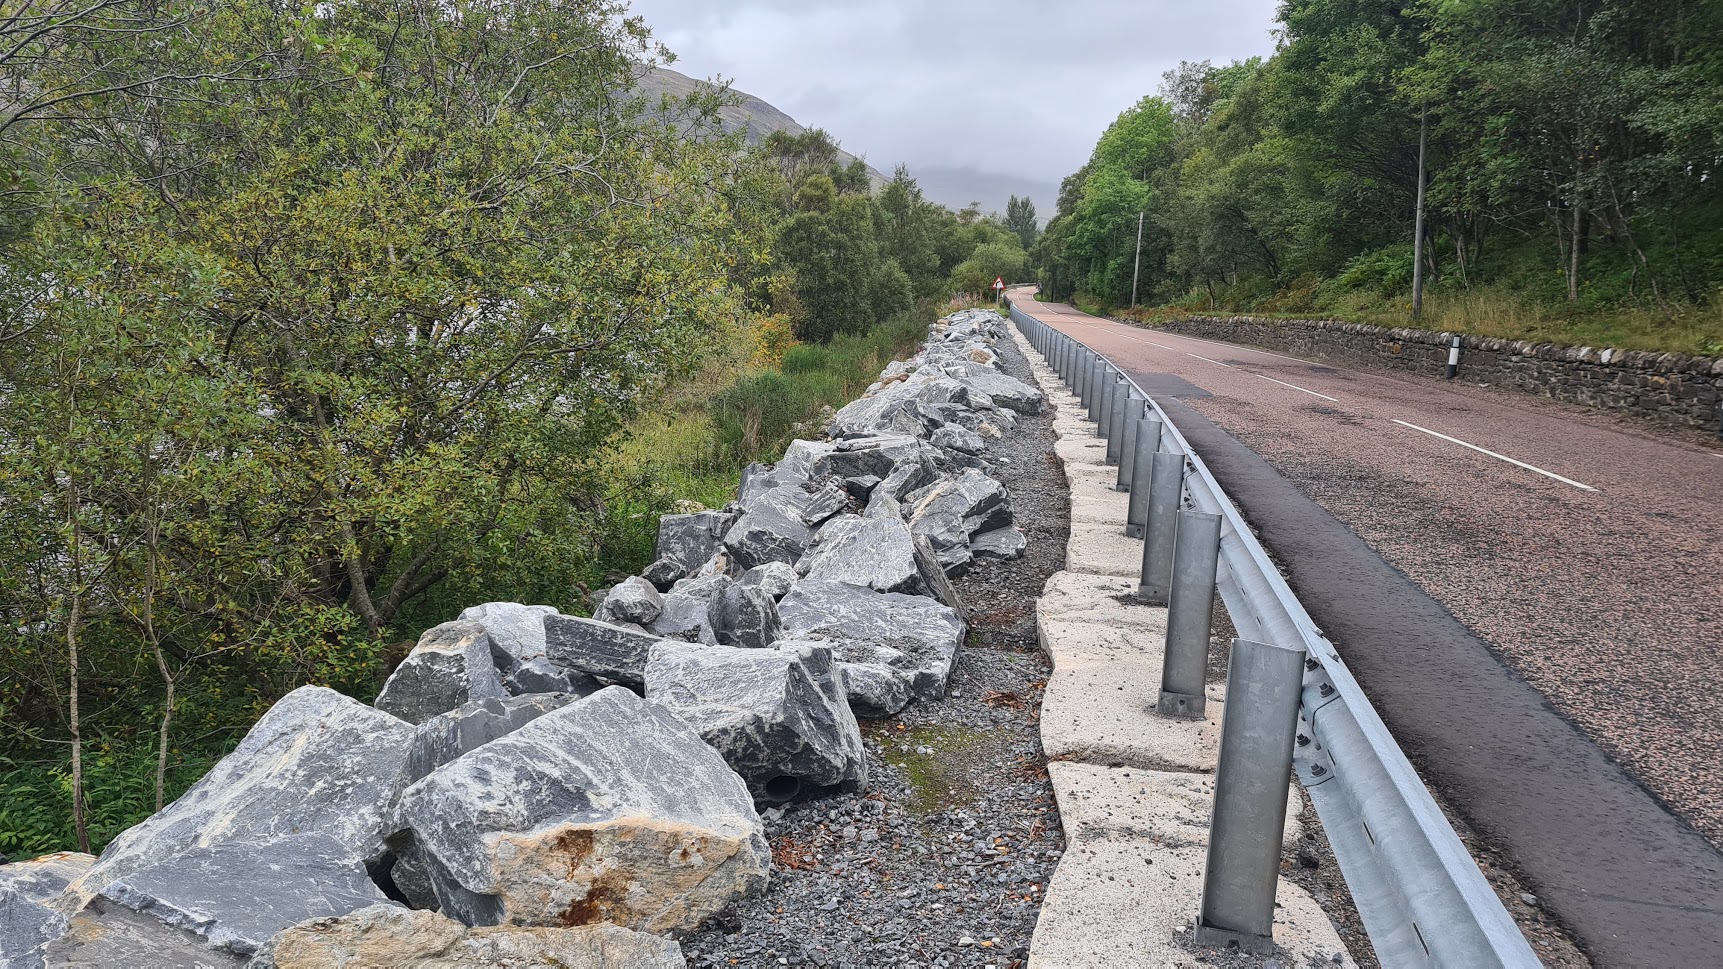 A85 ROAD SAFETY PROJECT